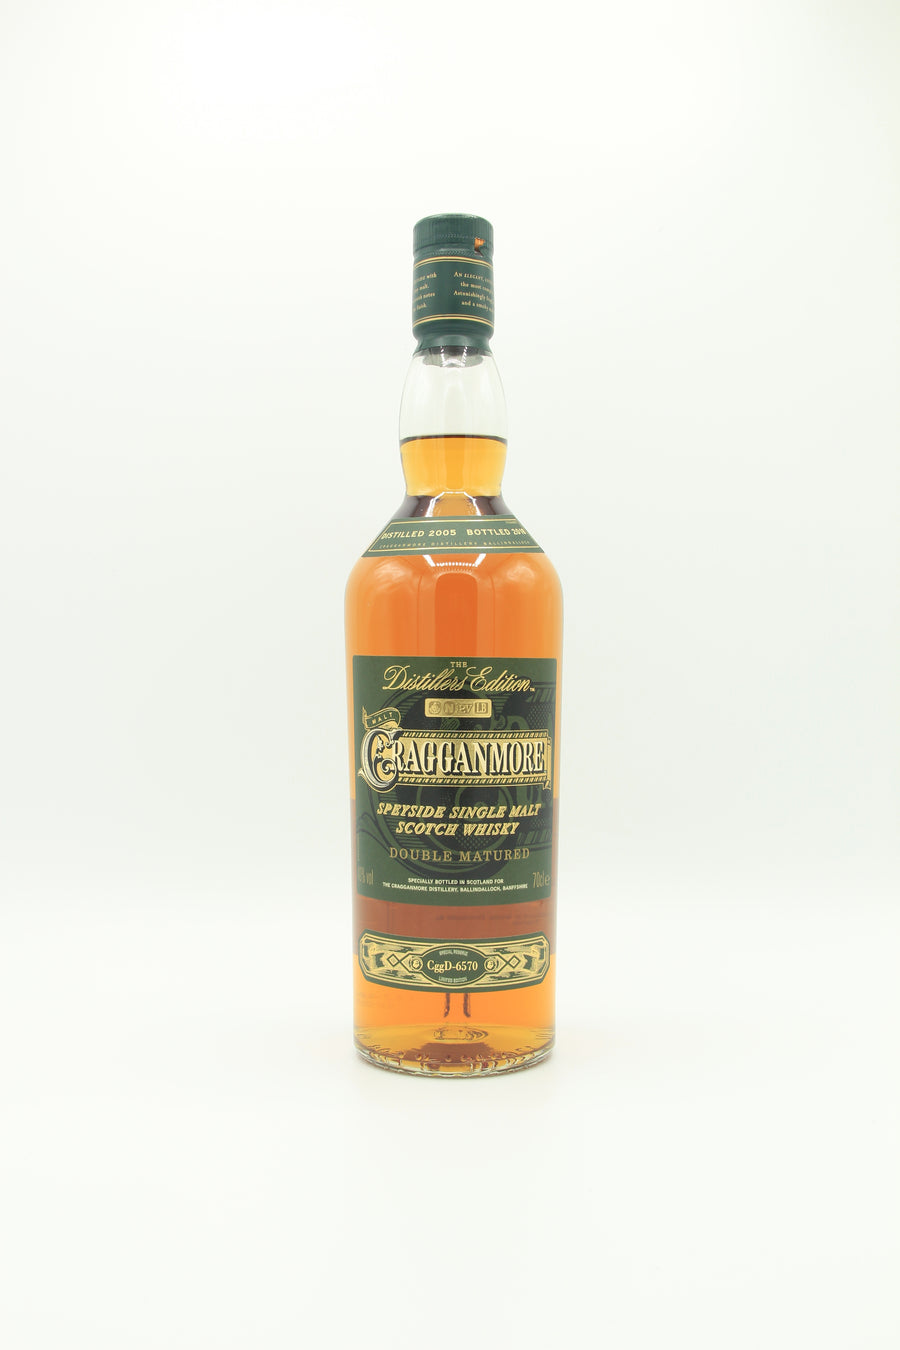 Cragganmore Distillers Edition 2005-2018 Port Wood Finish